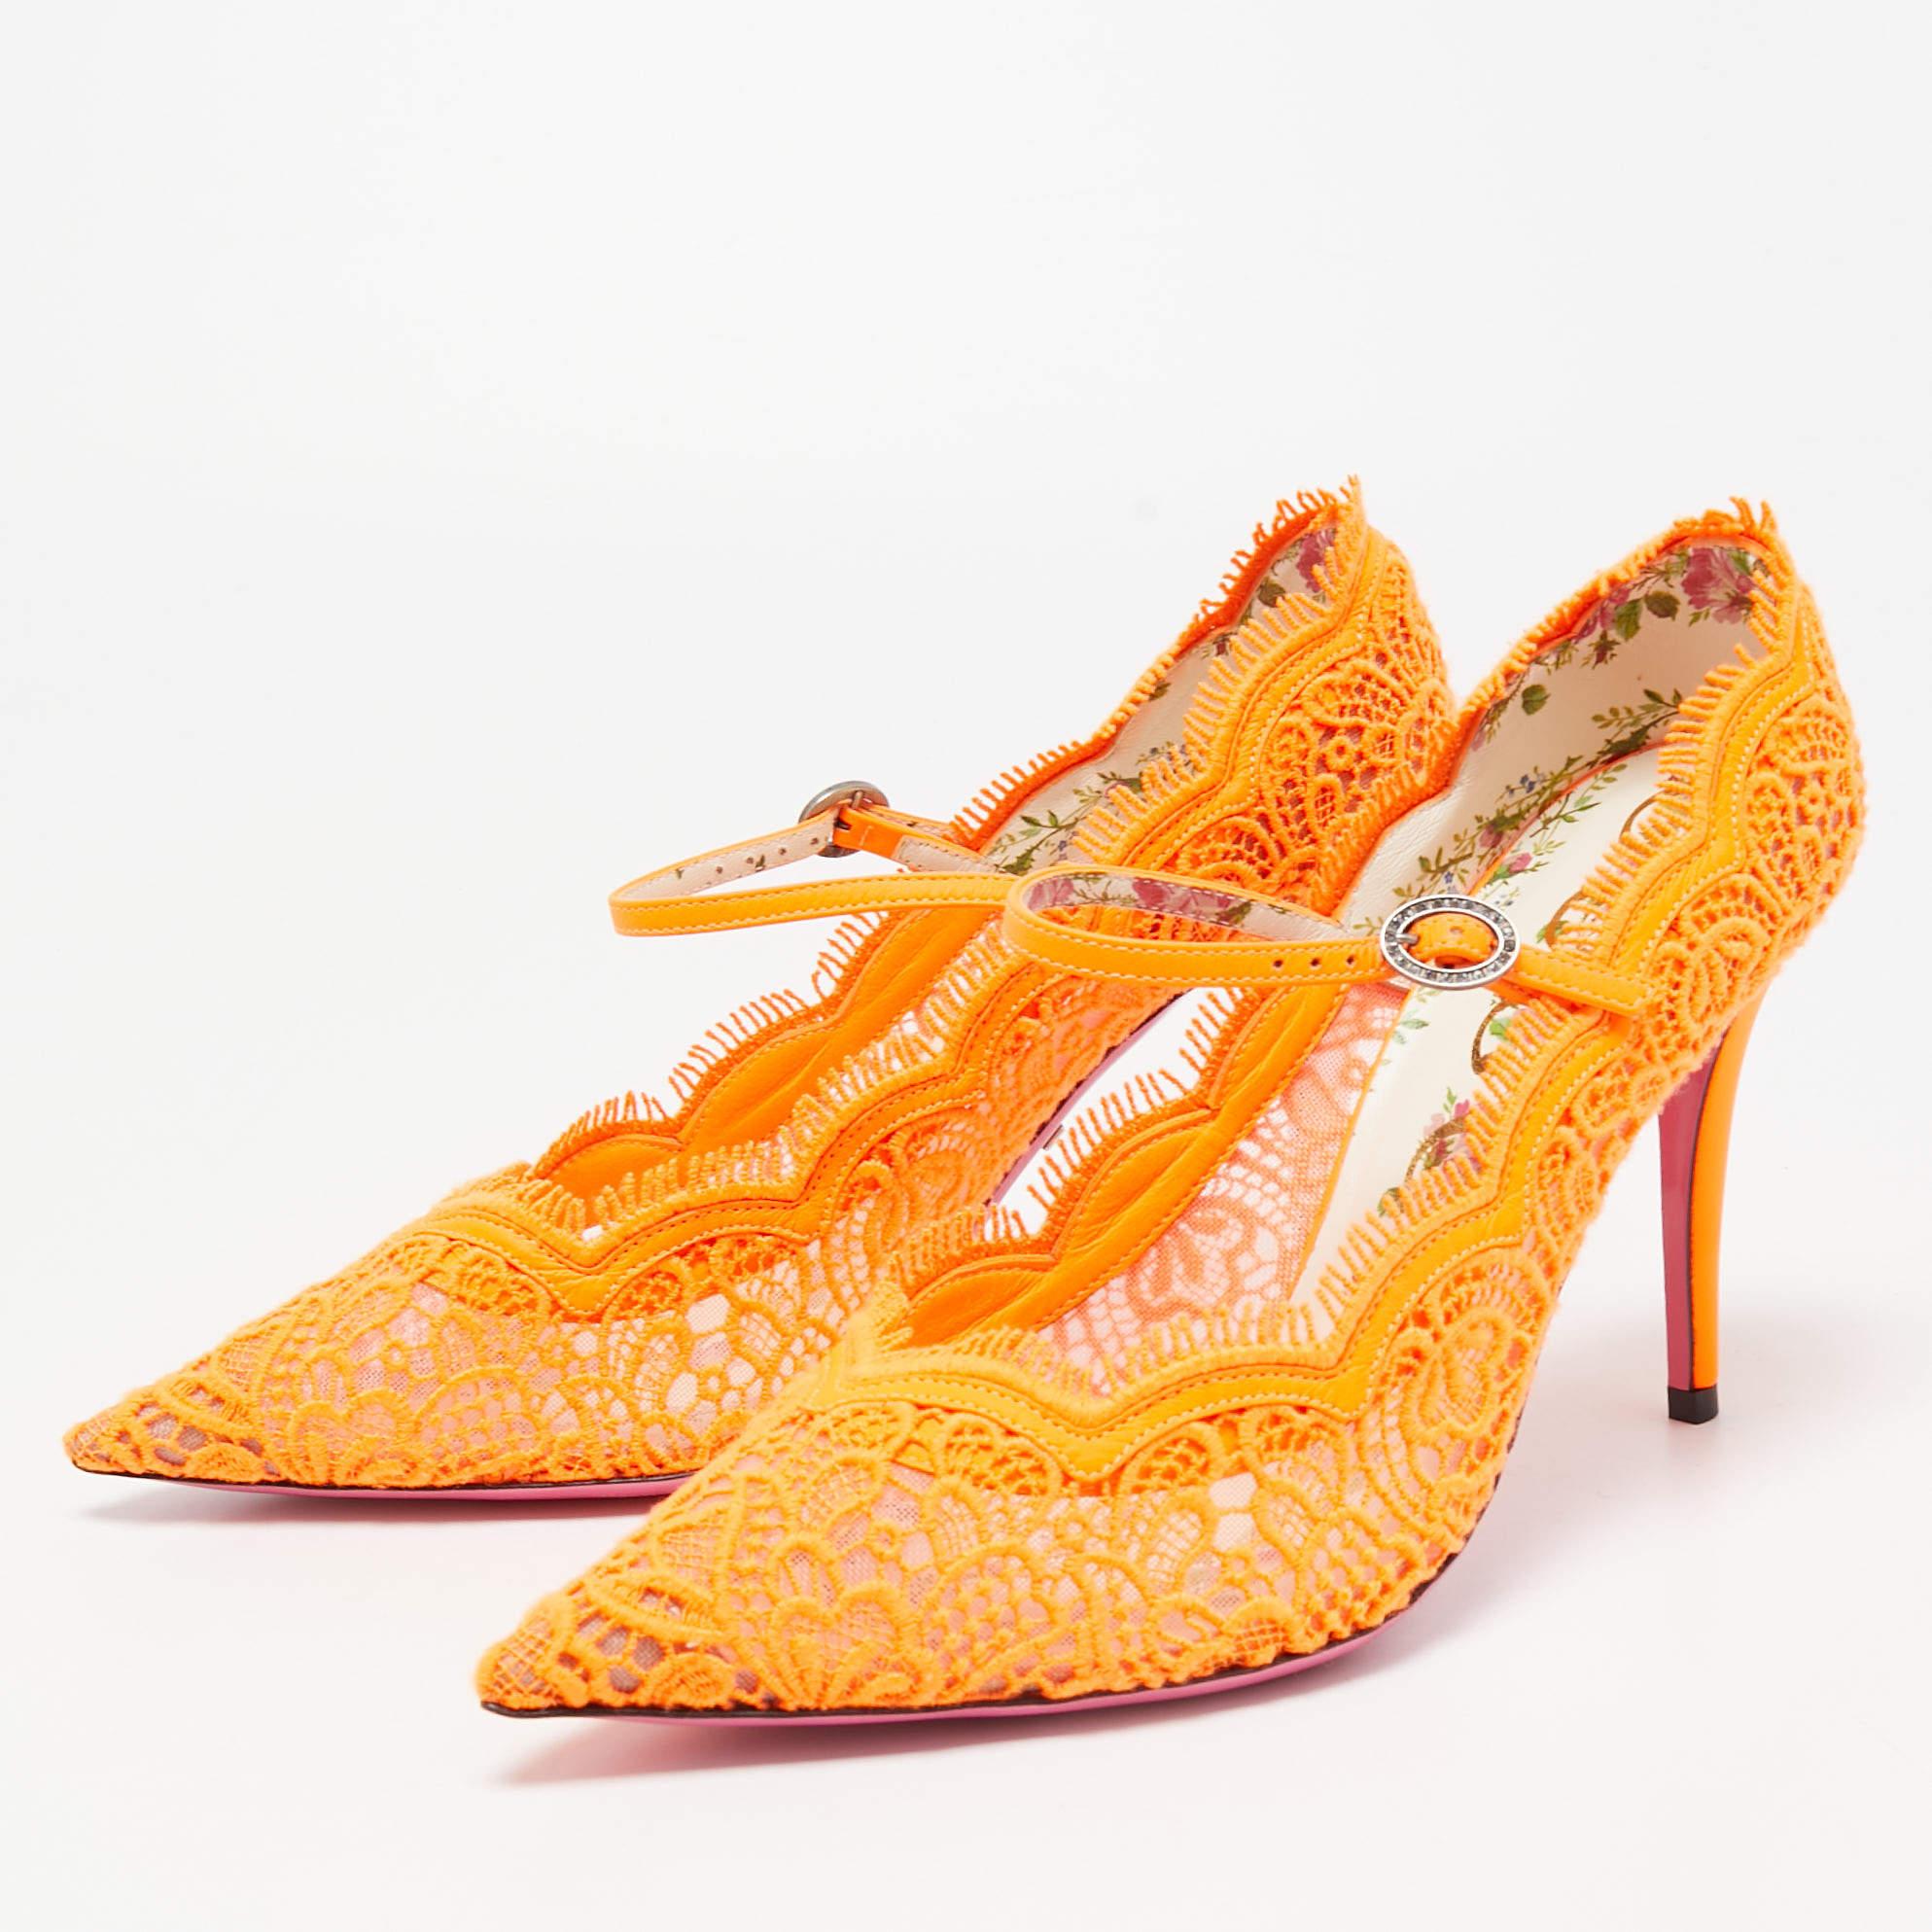 Women's Gucci Orange Fabric and Leather Virginia Mary Jane Pumps Size 38